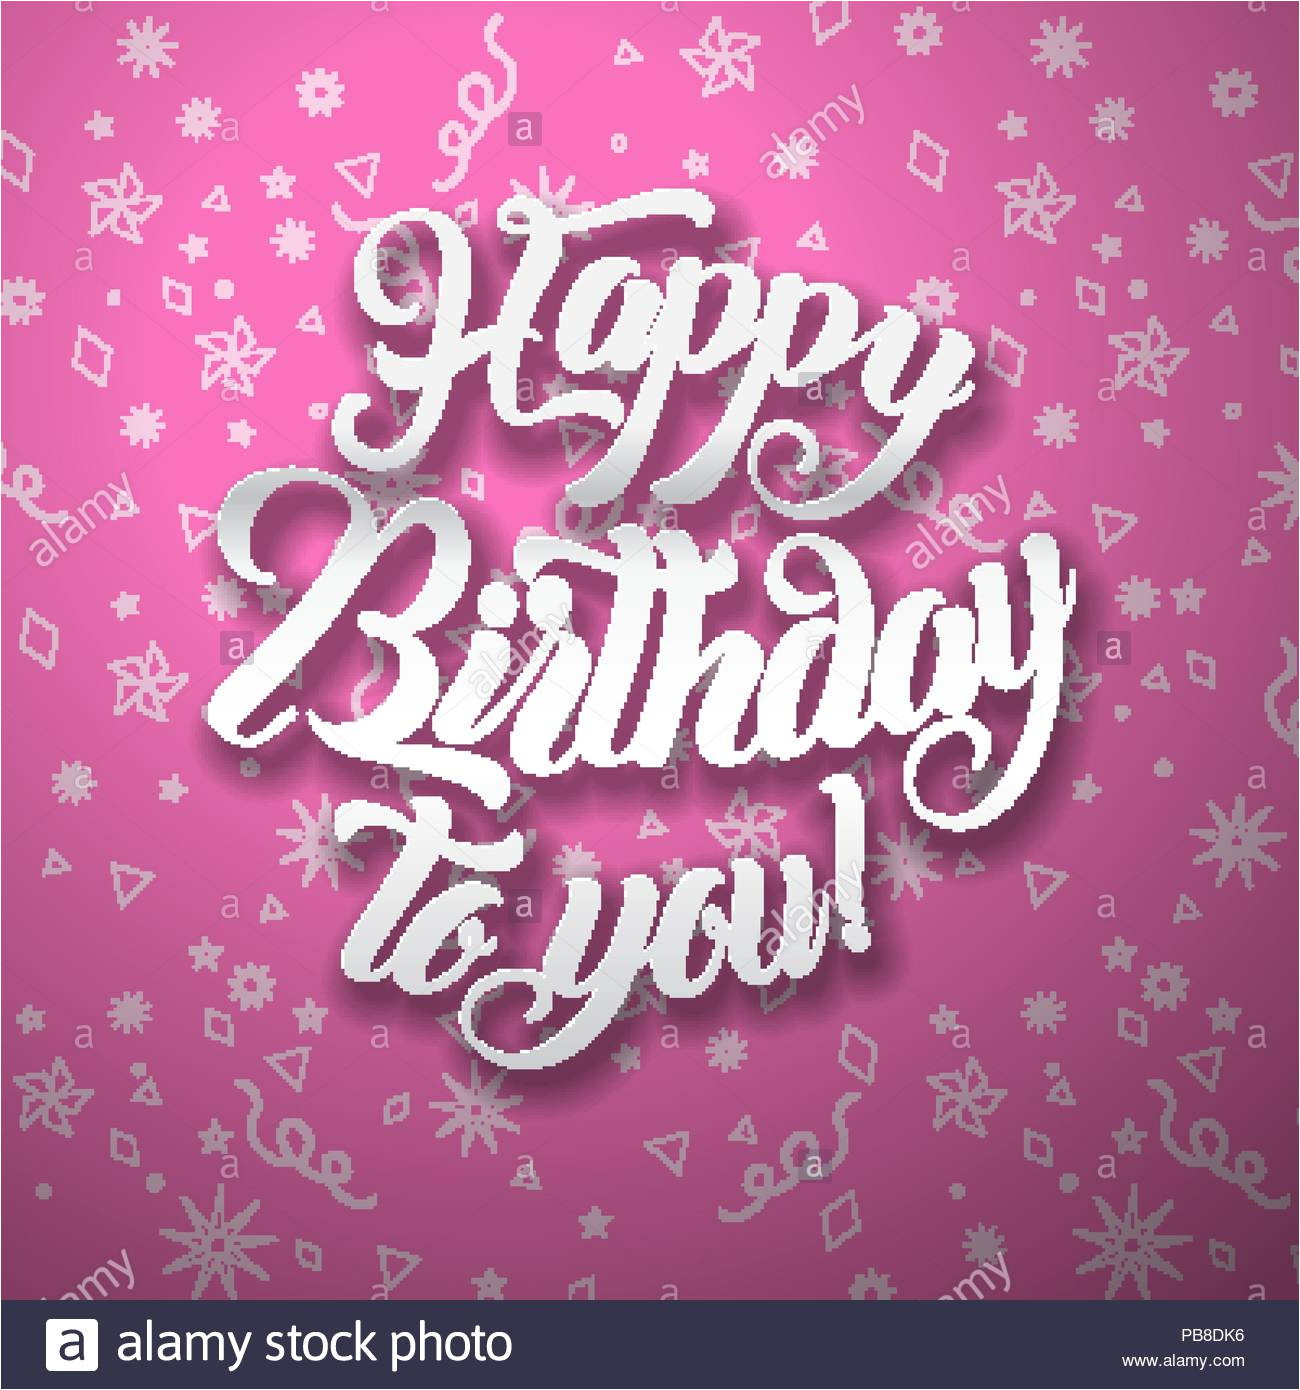 Happy Birthday Greeting Card Images Happy Birthday Greeting Card Background Vector Illustration